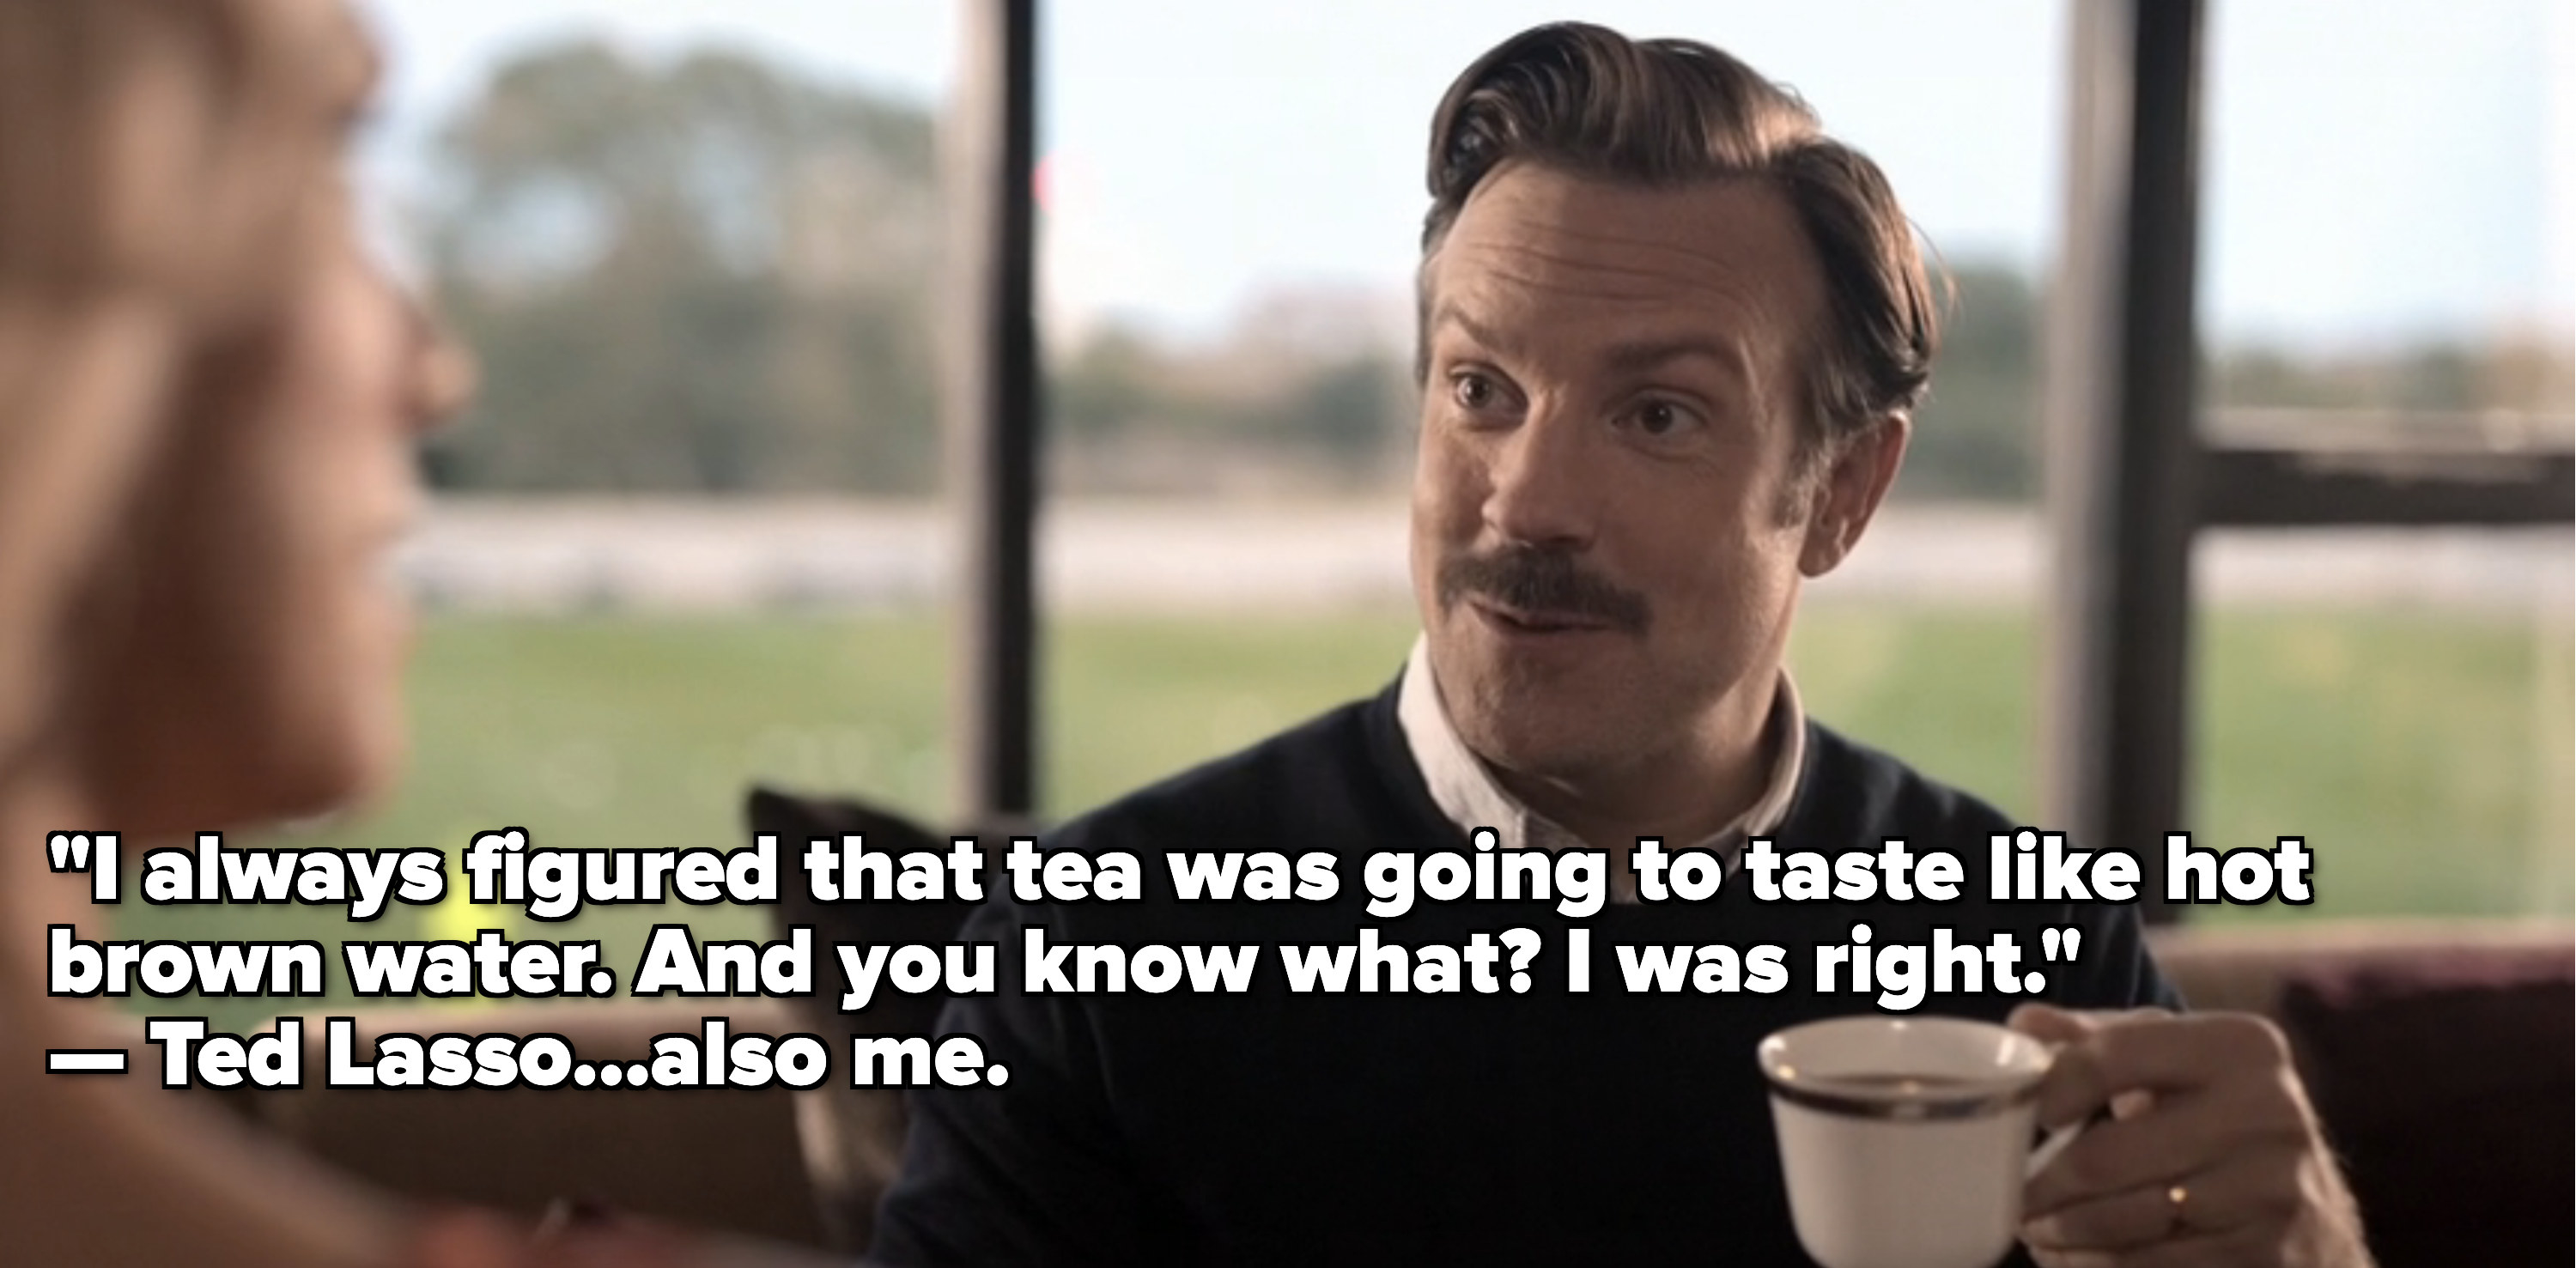 A scene from &quot;Ted Lasso&quot; where Ted is drinking tea